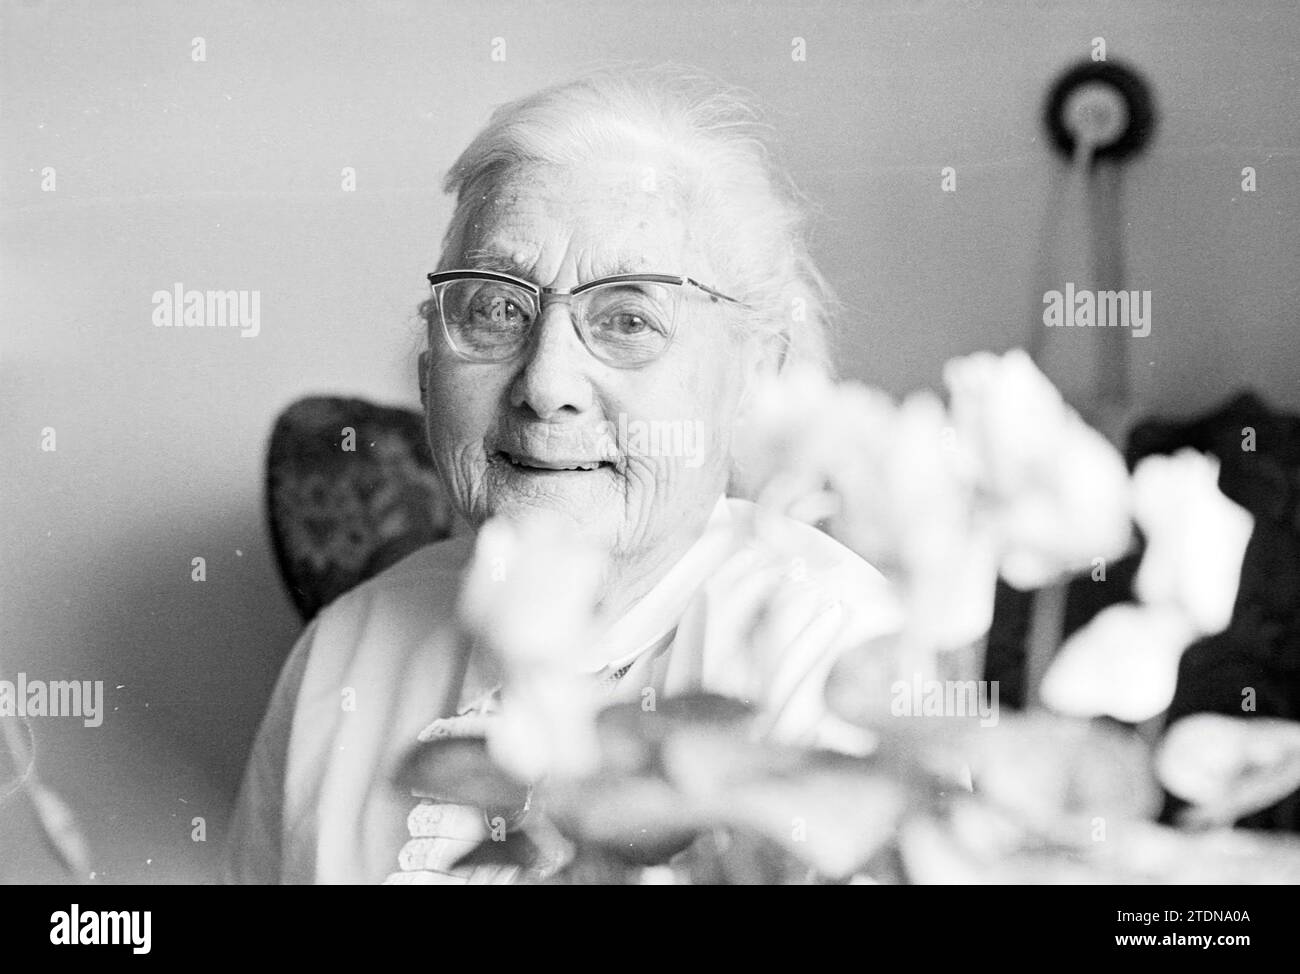 100 year old Mrs. Tehuis de Blinkert, Centenary, one hundred years, 24-02-1976, Whizgle News from the Past, Tailored for the Future. Explore historical narratives, Dutch The Netherlands agency image with a modern perspective, bridging the gap between yesterday's events and tomorrow's insights. A timeless journey shaping the stories that shape our future Stock Photo